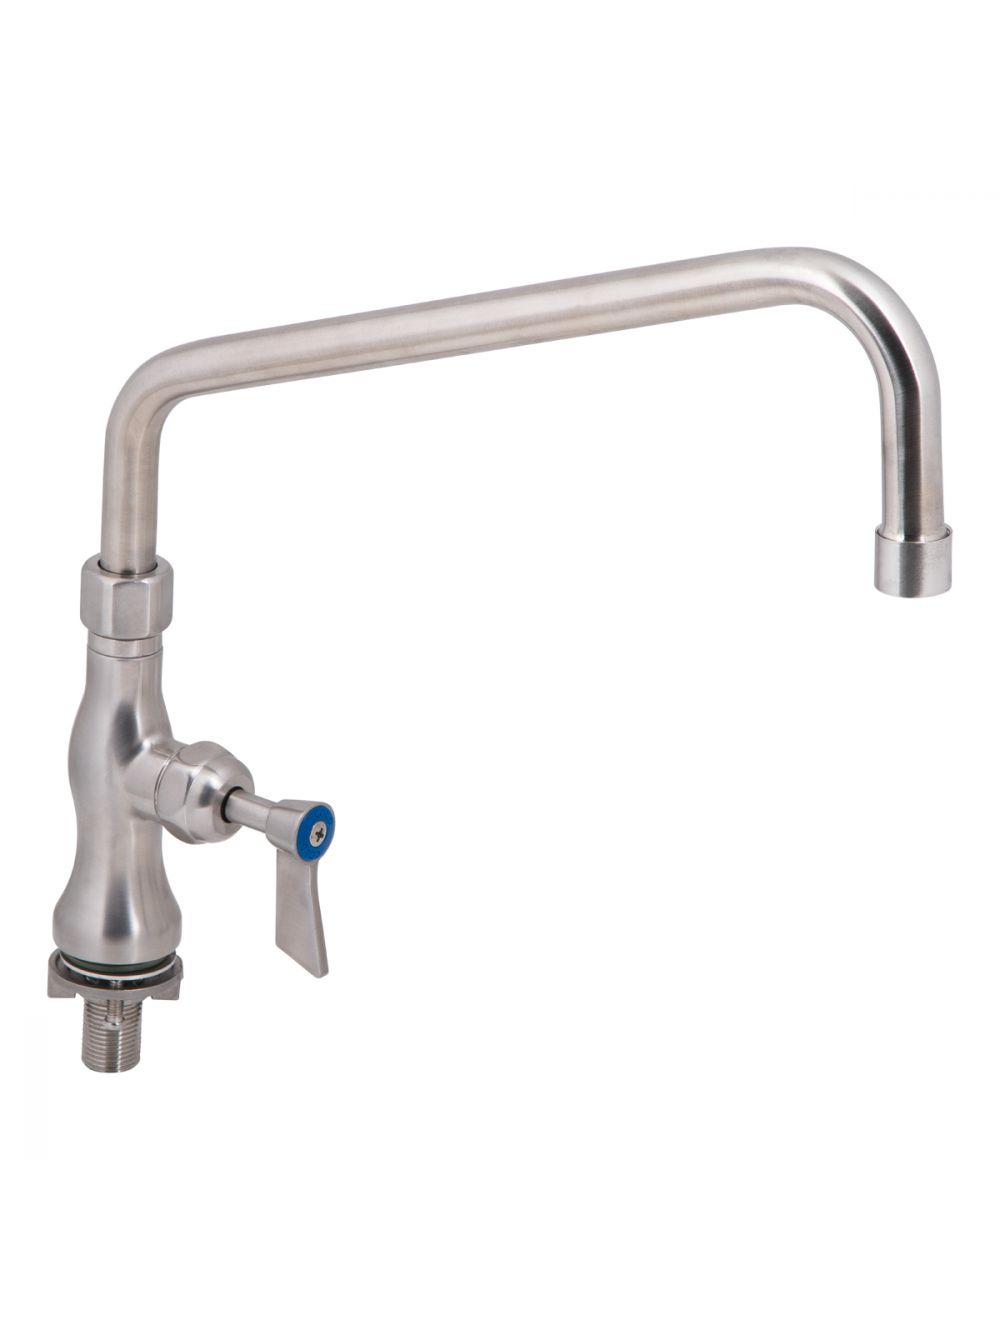 Stainless Steel Single Hob Mount Tap Body with Single Control and Spout